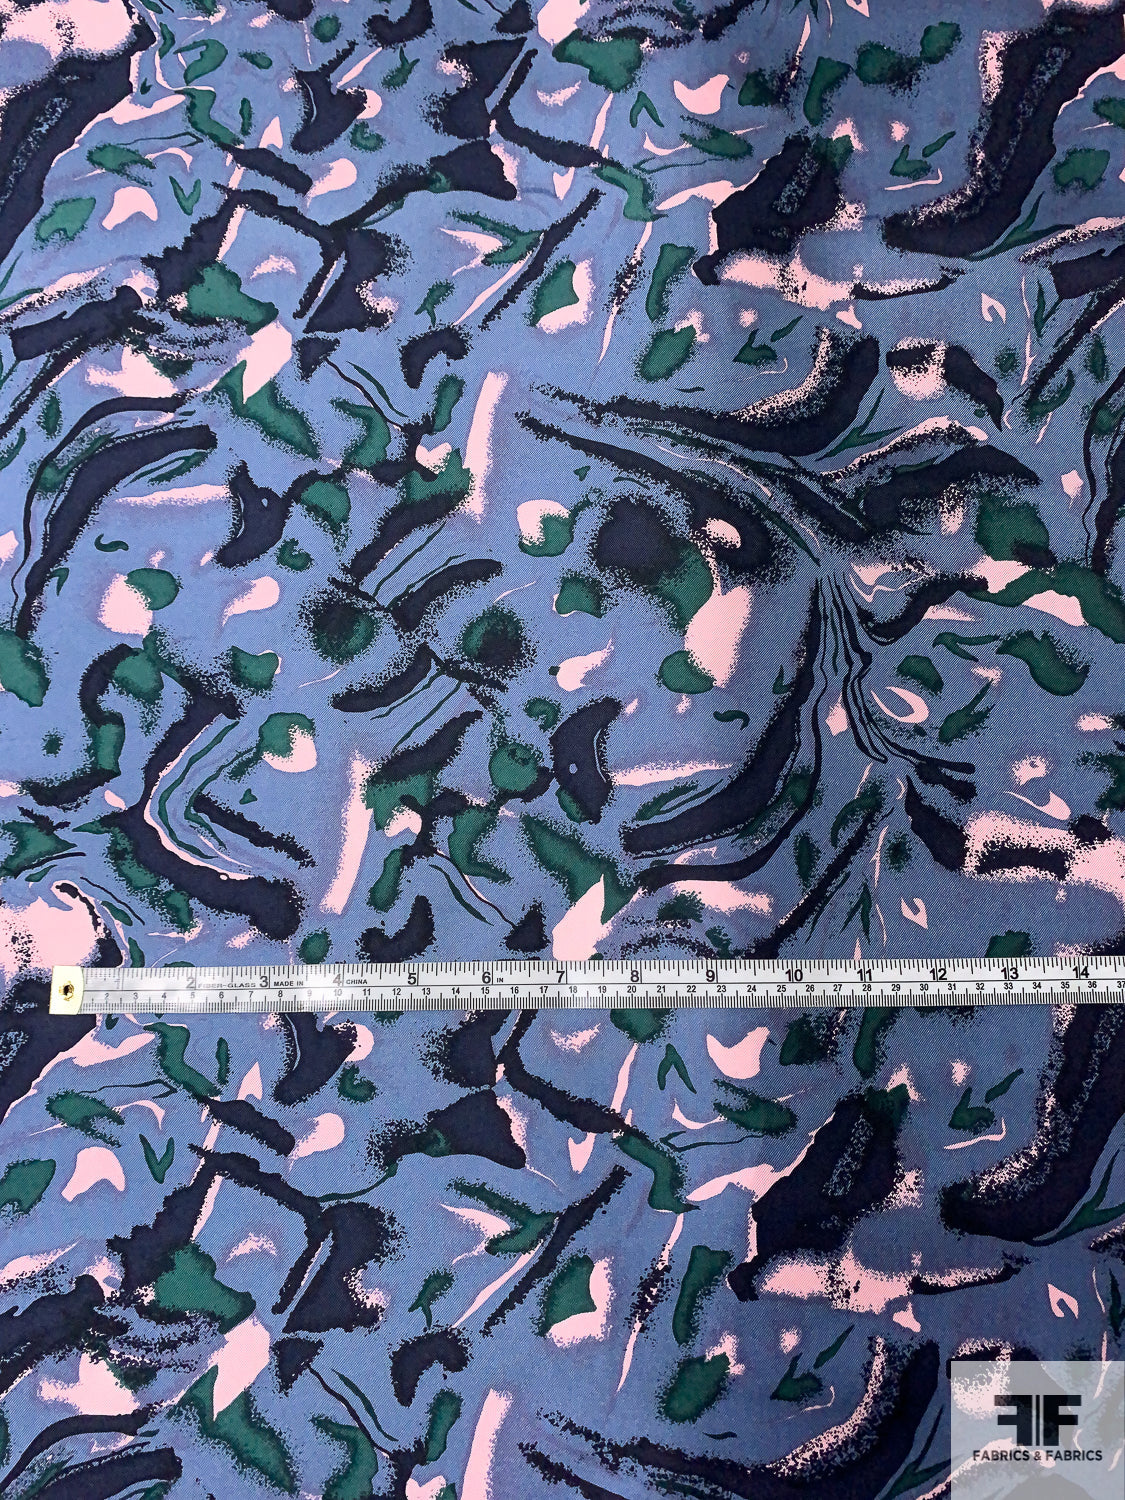 Abstract Printed Vintage Silk Twill - Antique Blue / Navy / Evergreen / Light Pink